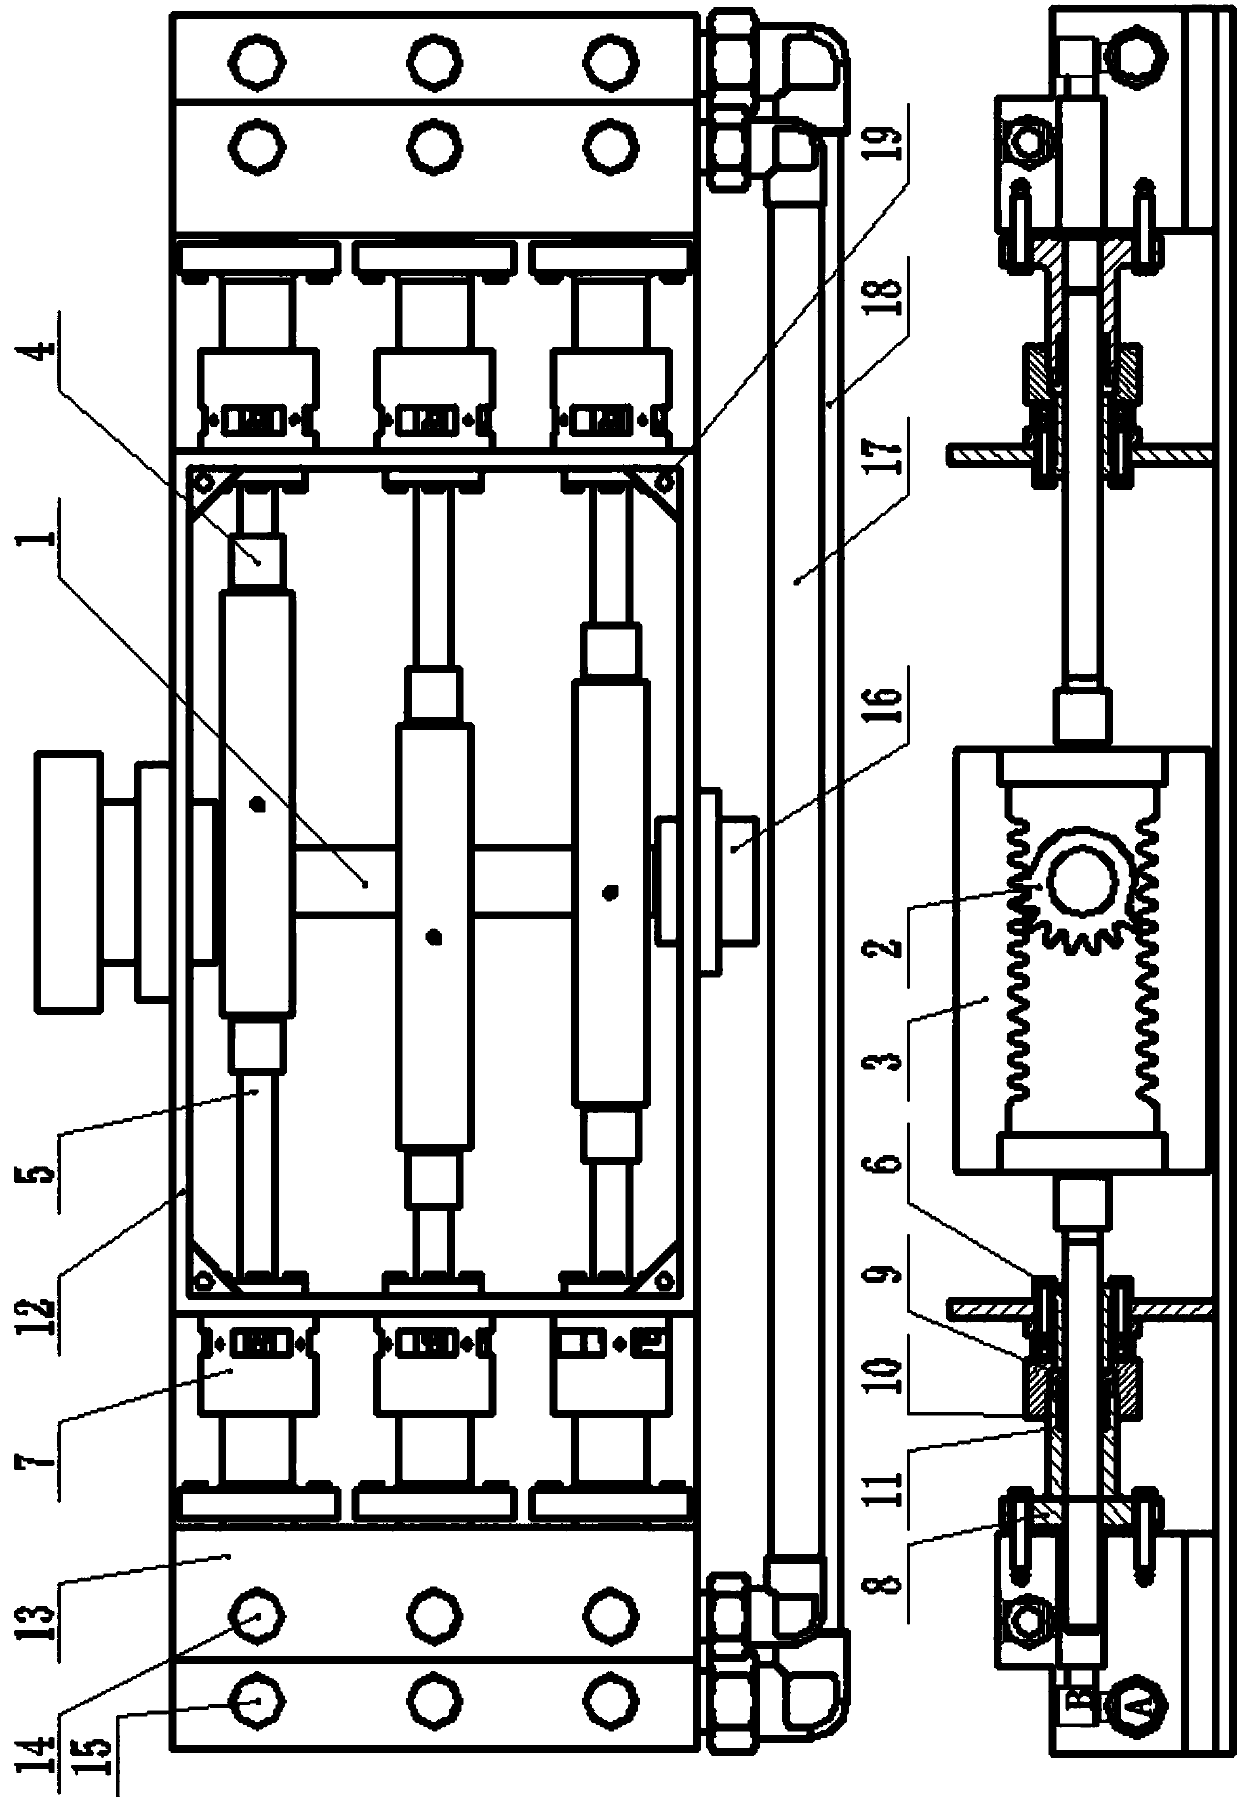 A horizontal three-cylinder plunger reciprocating pump driven by rack and pinion